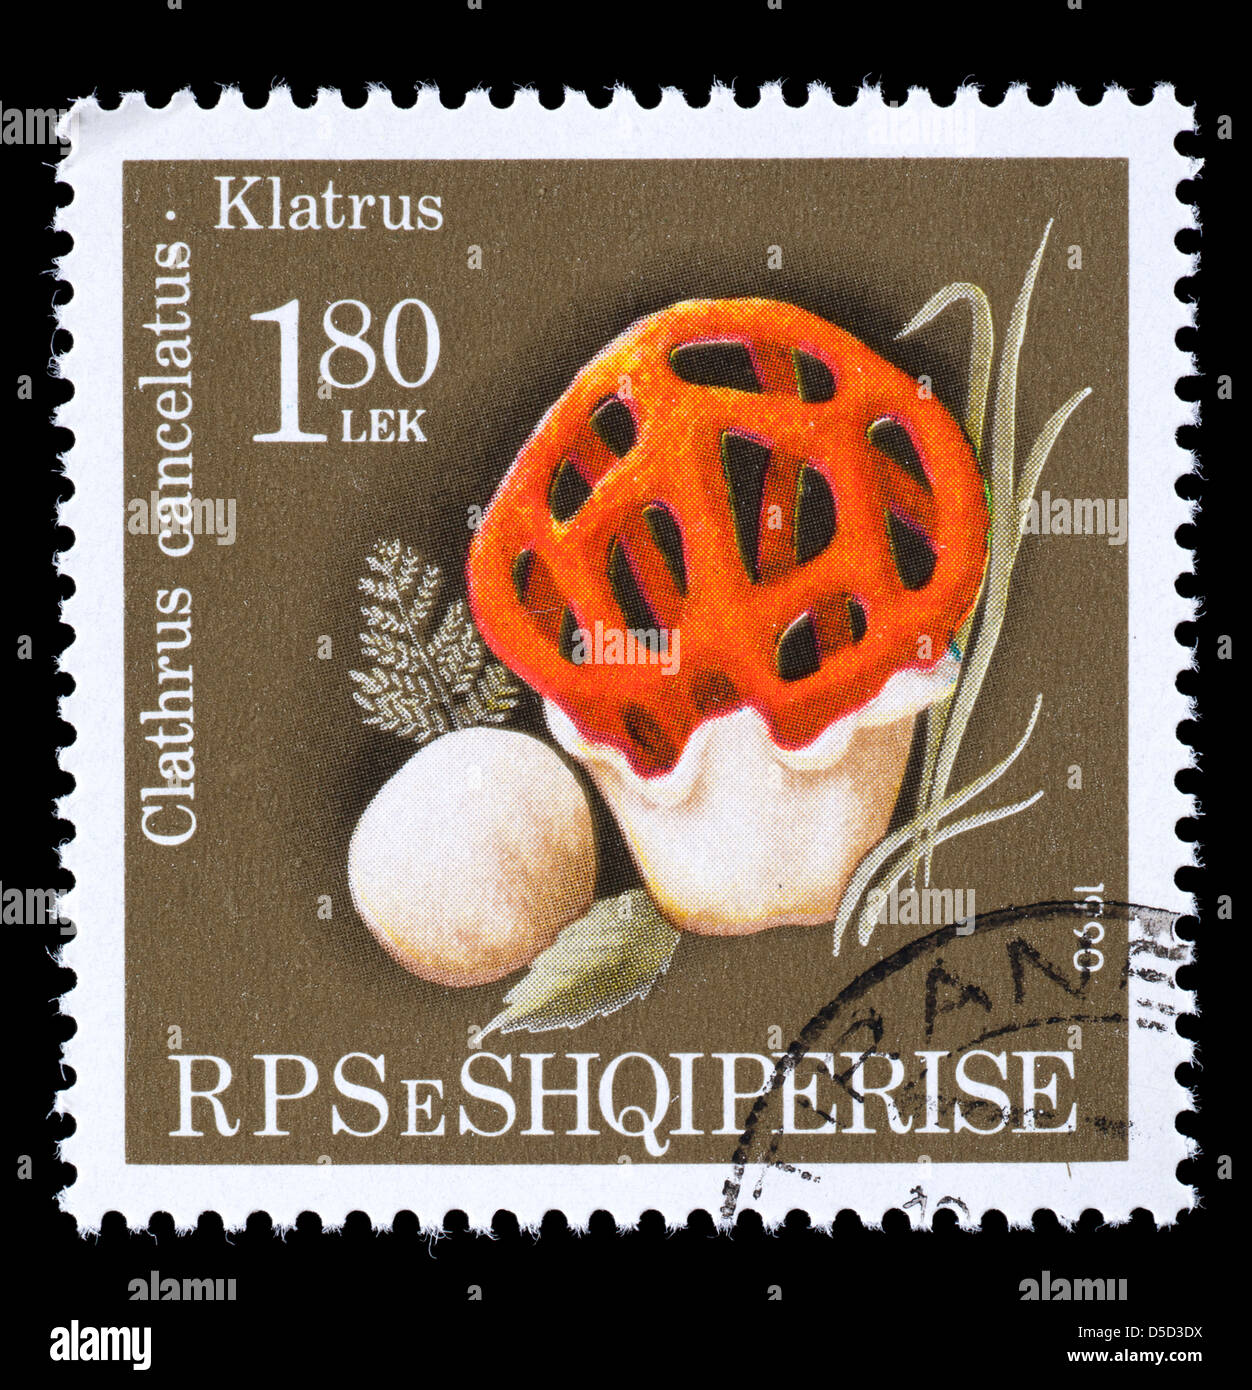 Postage stamp from Albania depicting depicting a basket stinkhorn mushroom (Clathrus cancellatus) Stock Photo